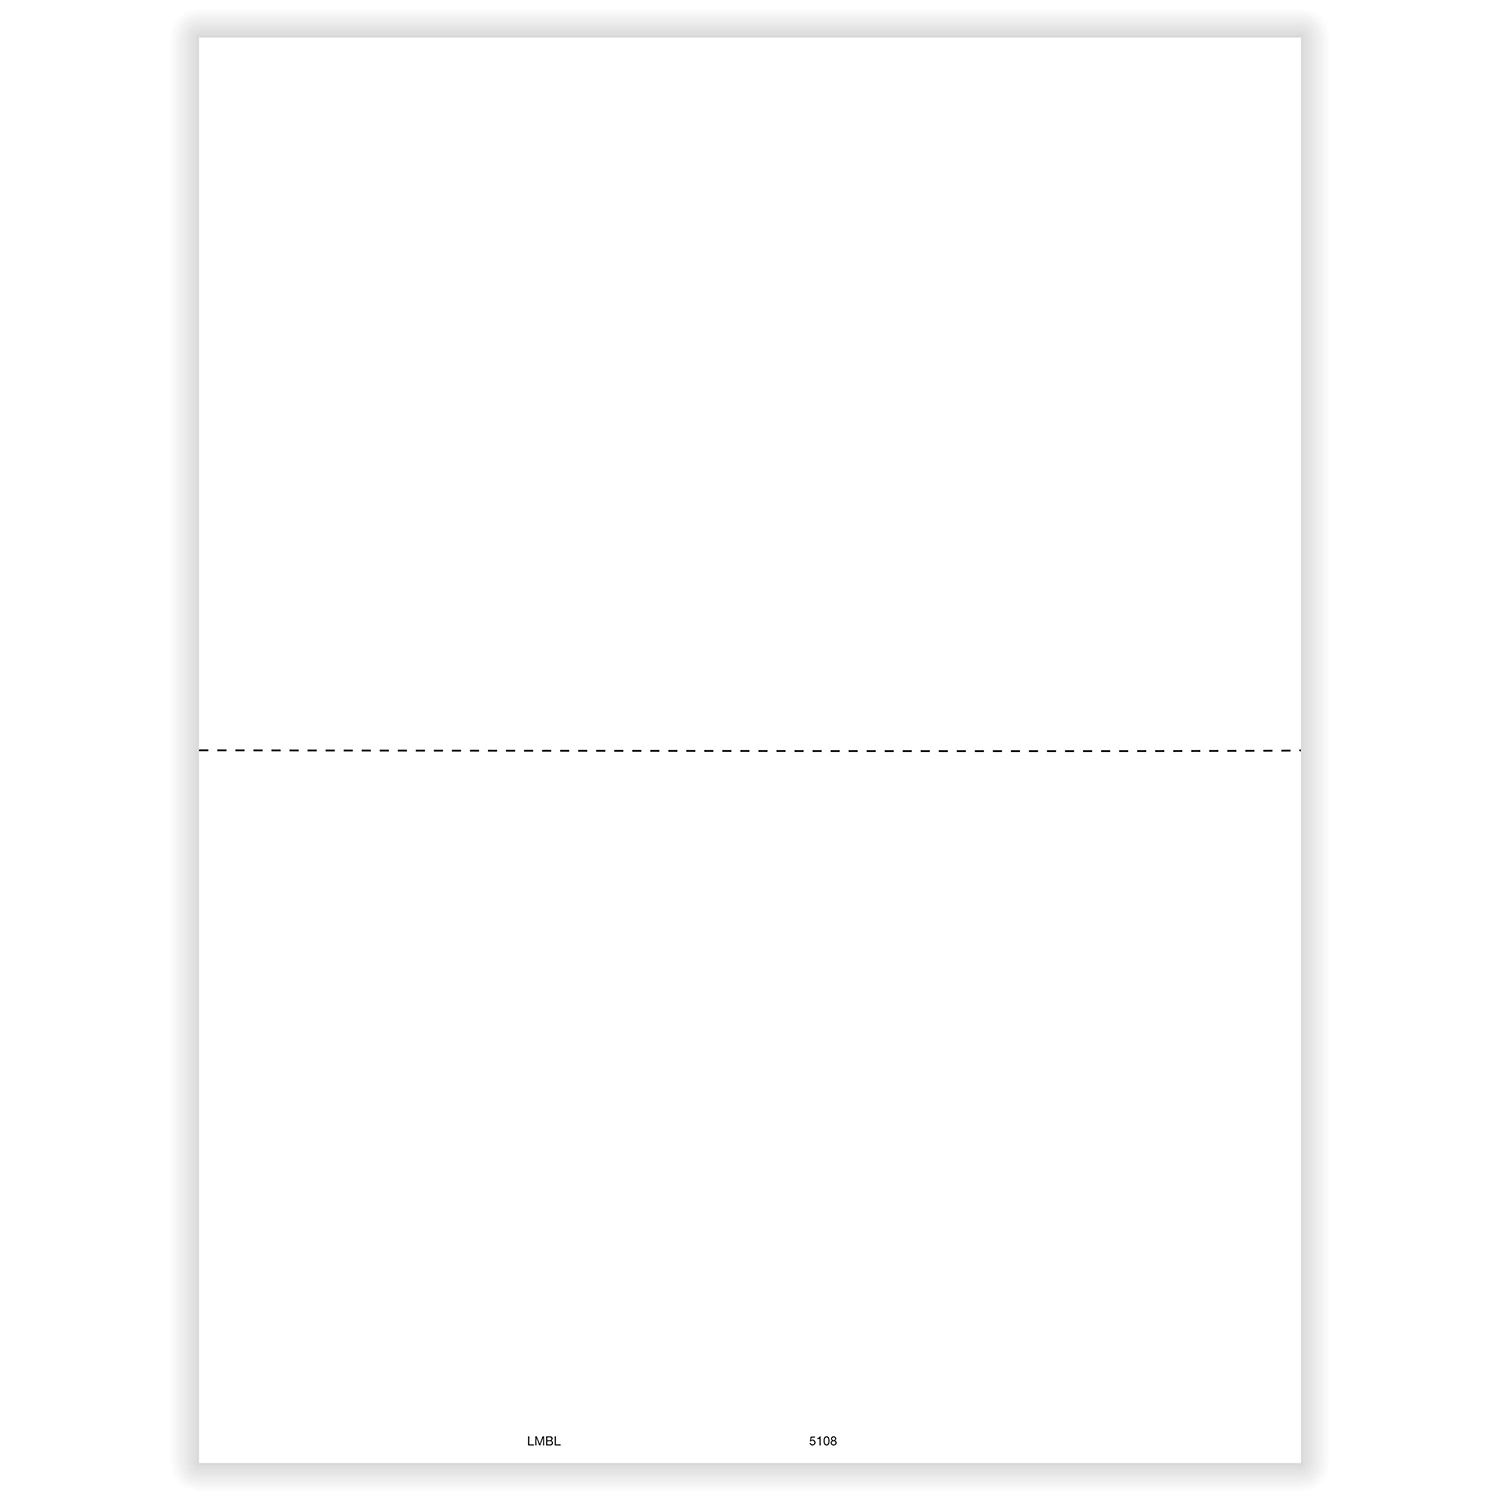 Picture of 1099-MISC Blank, Copy B, 2-Up, w/ Backer Instructions (1,000 Forms)